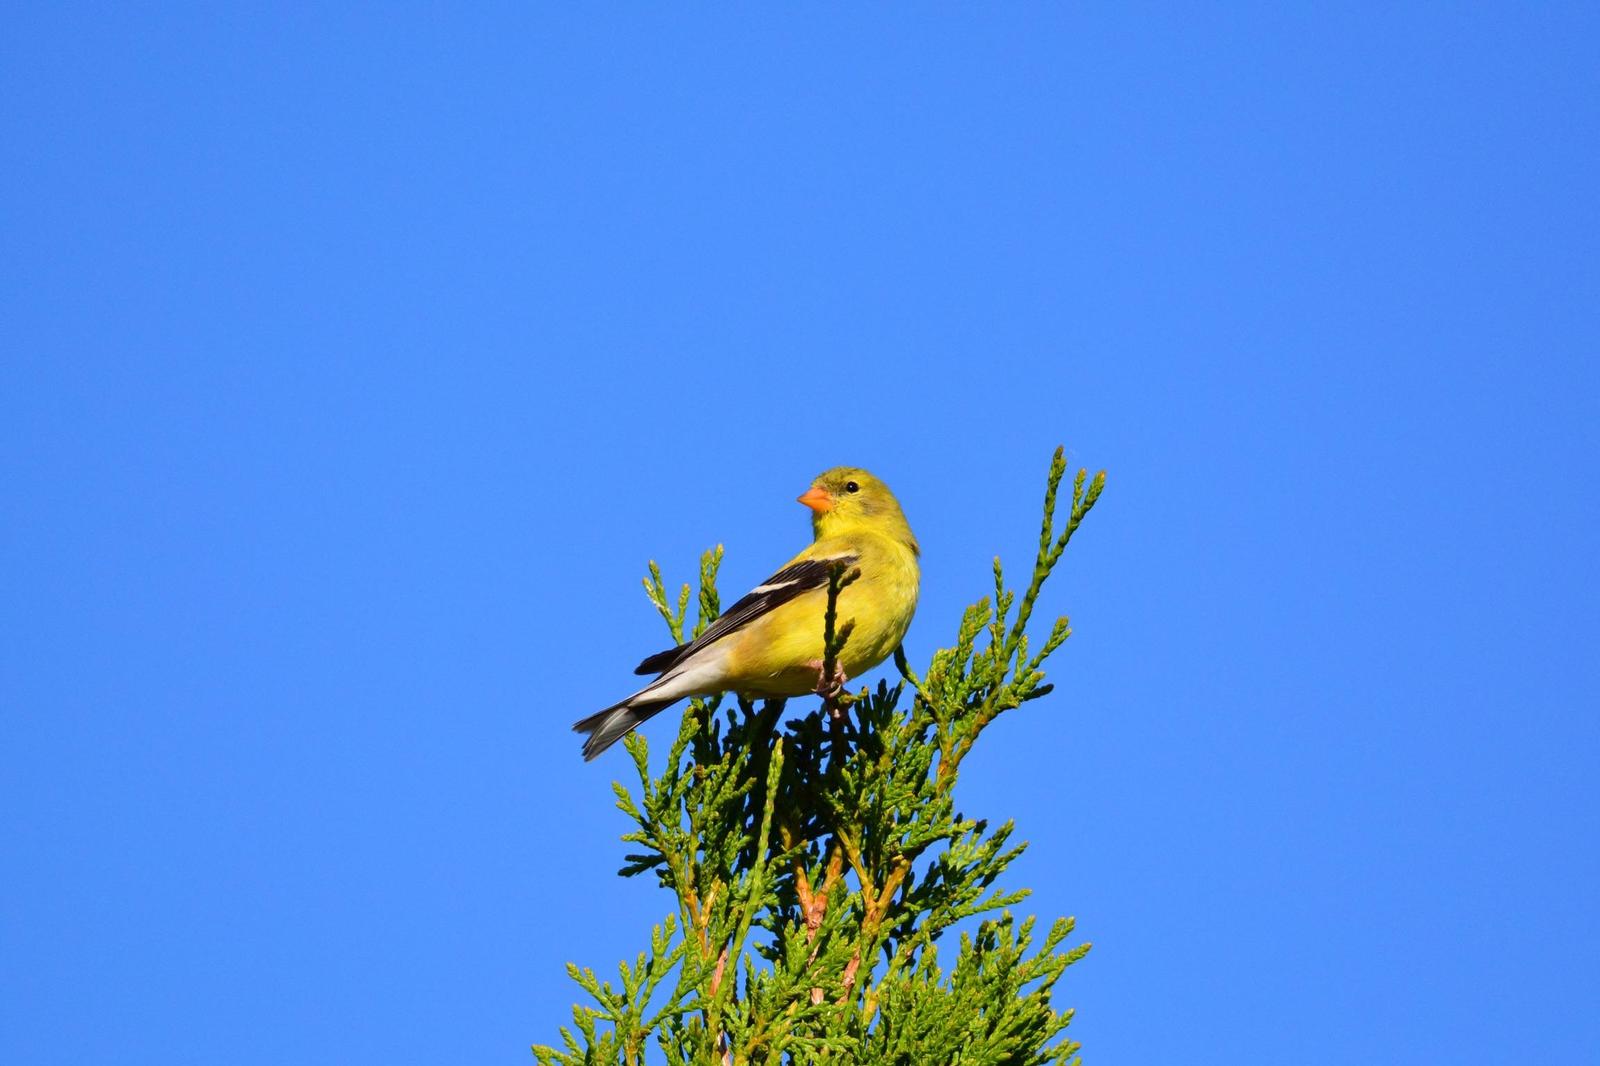 American Goldfinch Photo by Linda Cote